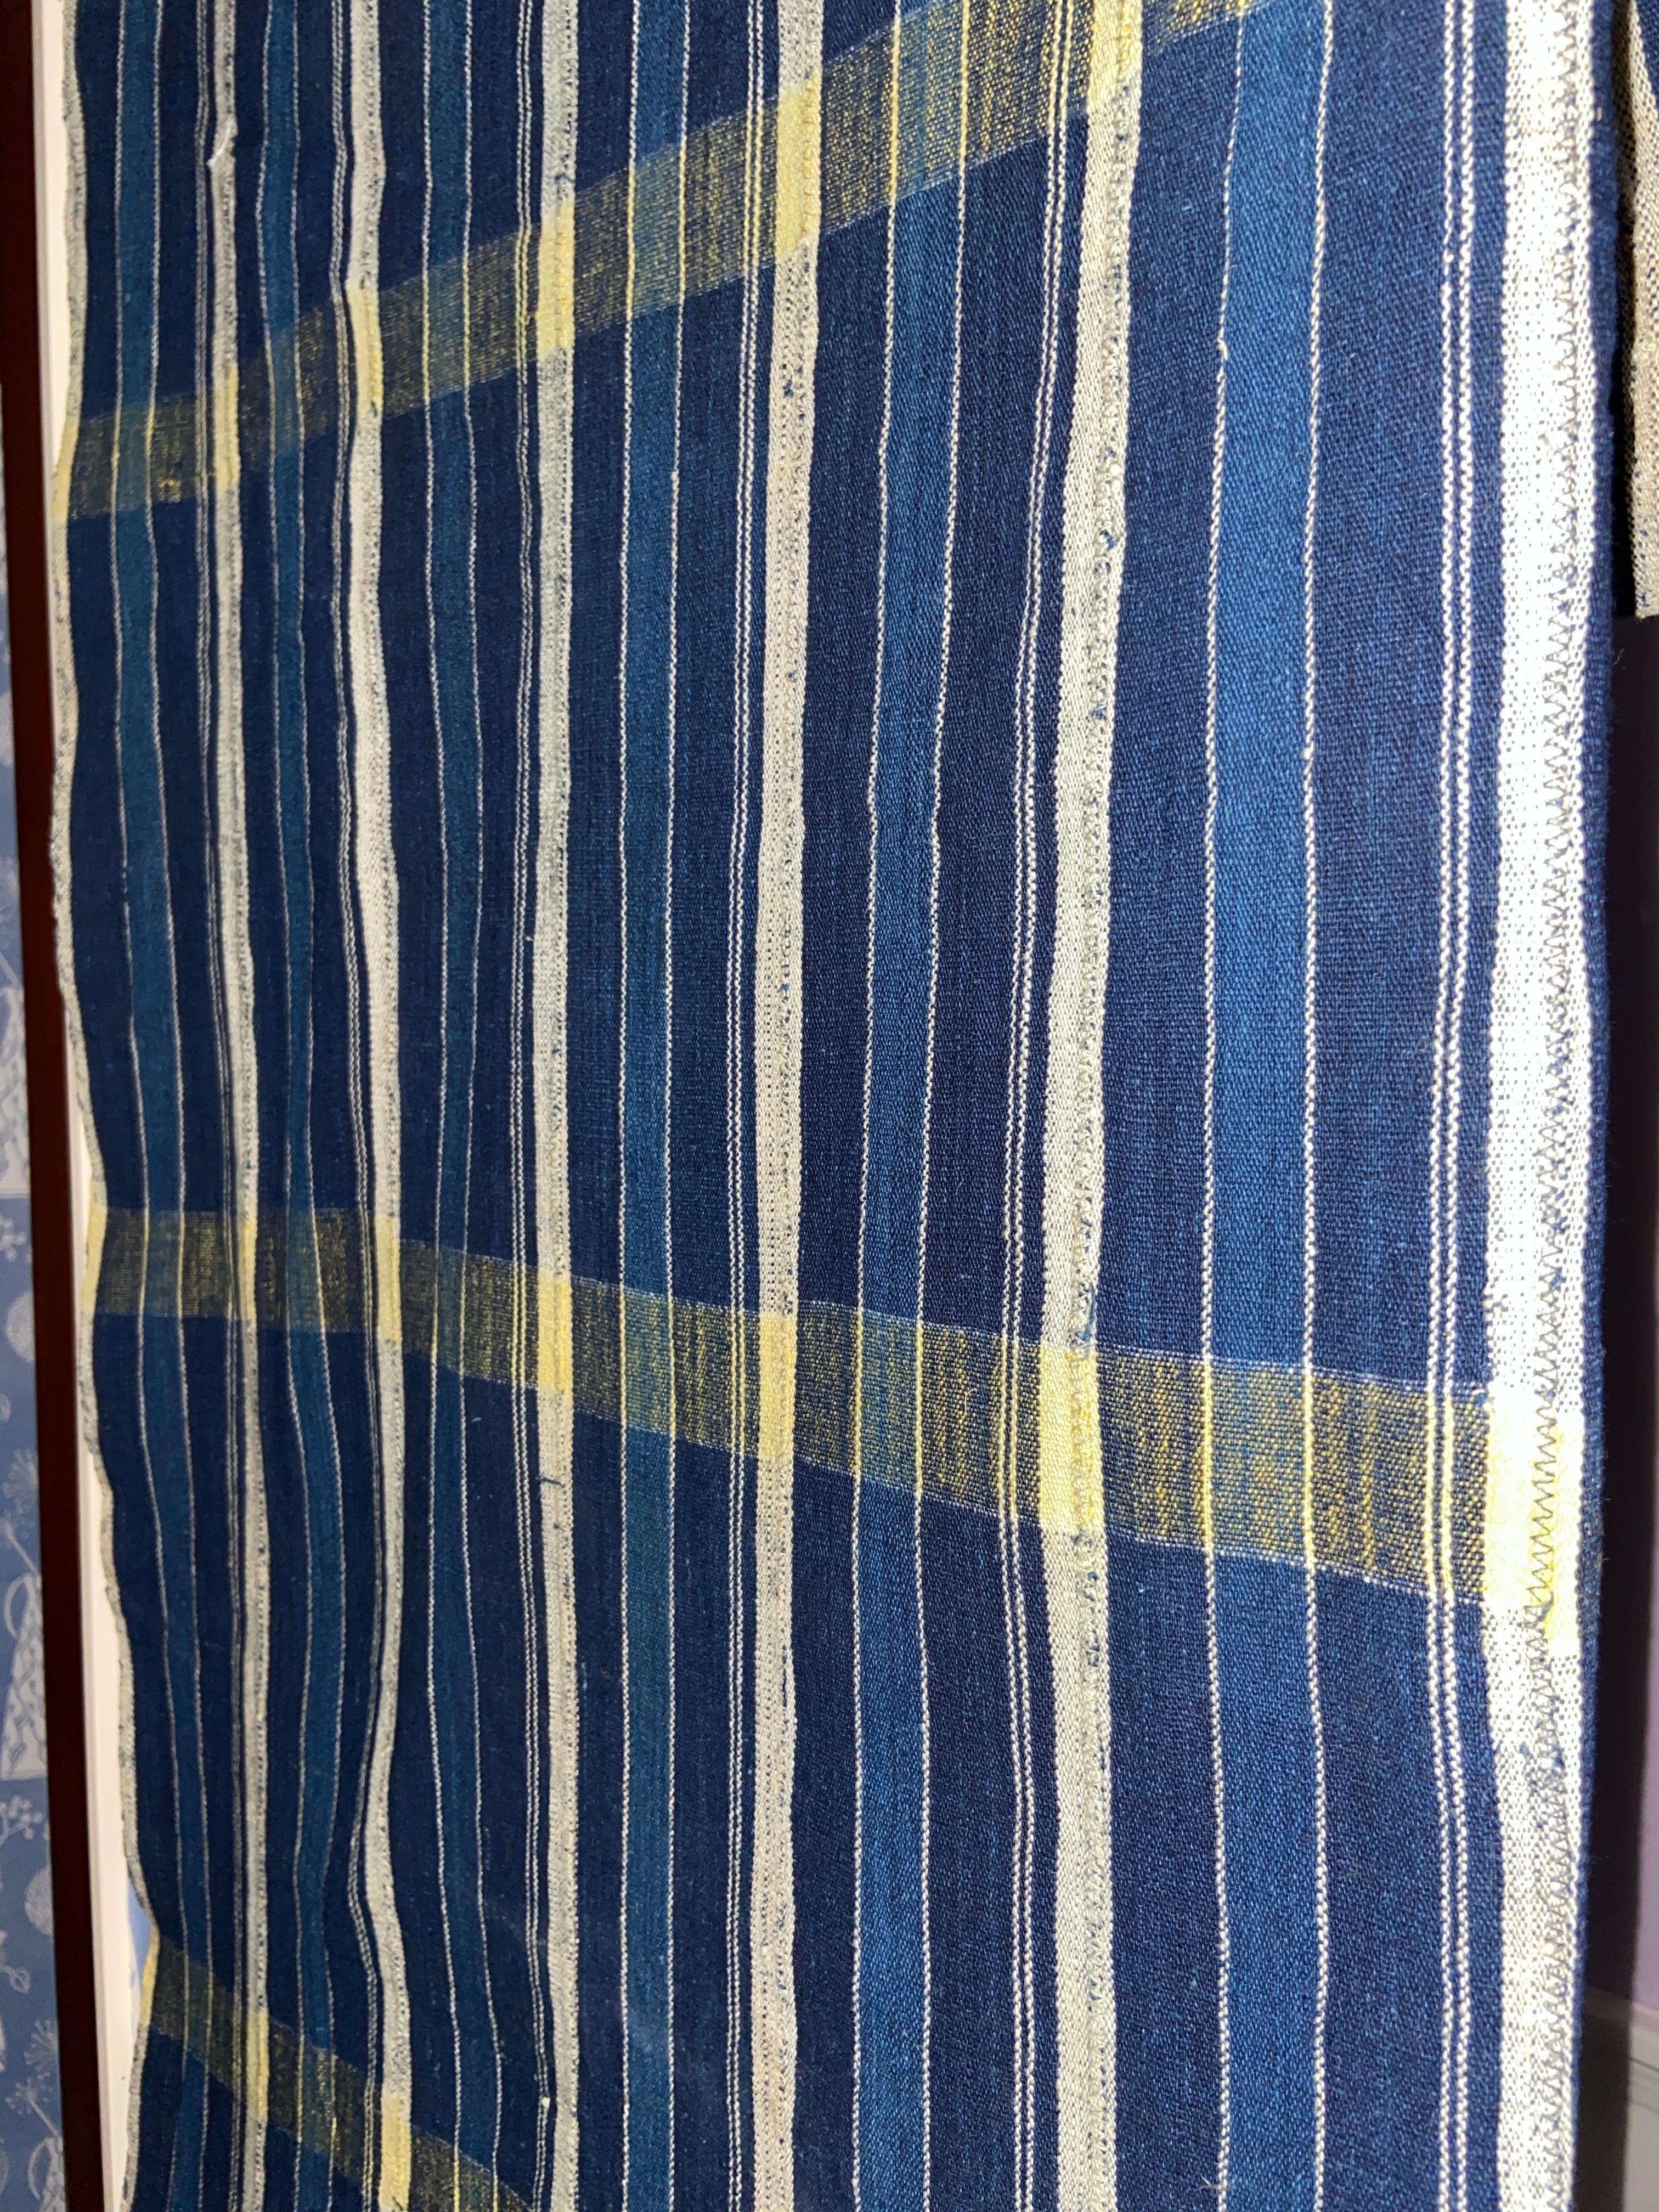 Hand-Crafted Vintage Men's Cloth in Blue and Yellow Stripes, Ivory Coast, 20th Century For Sale